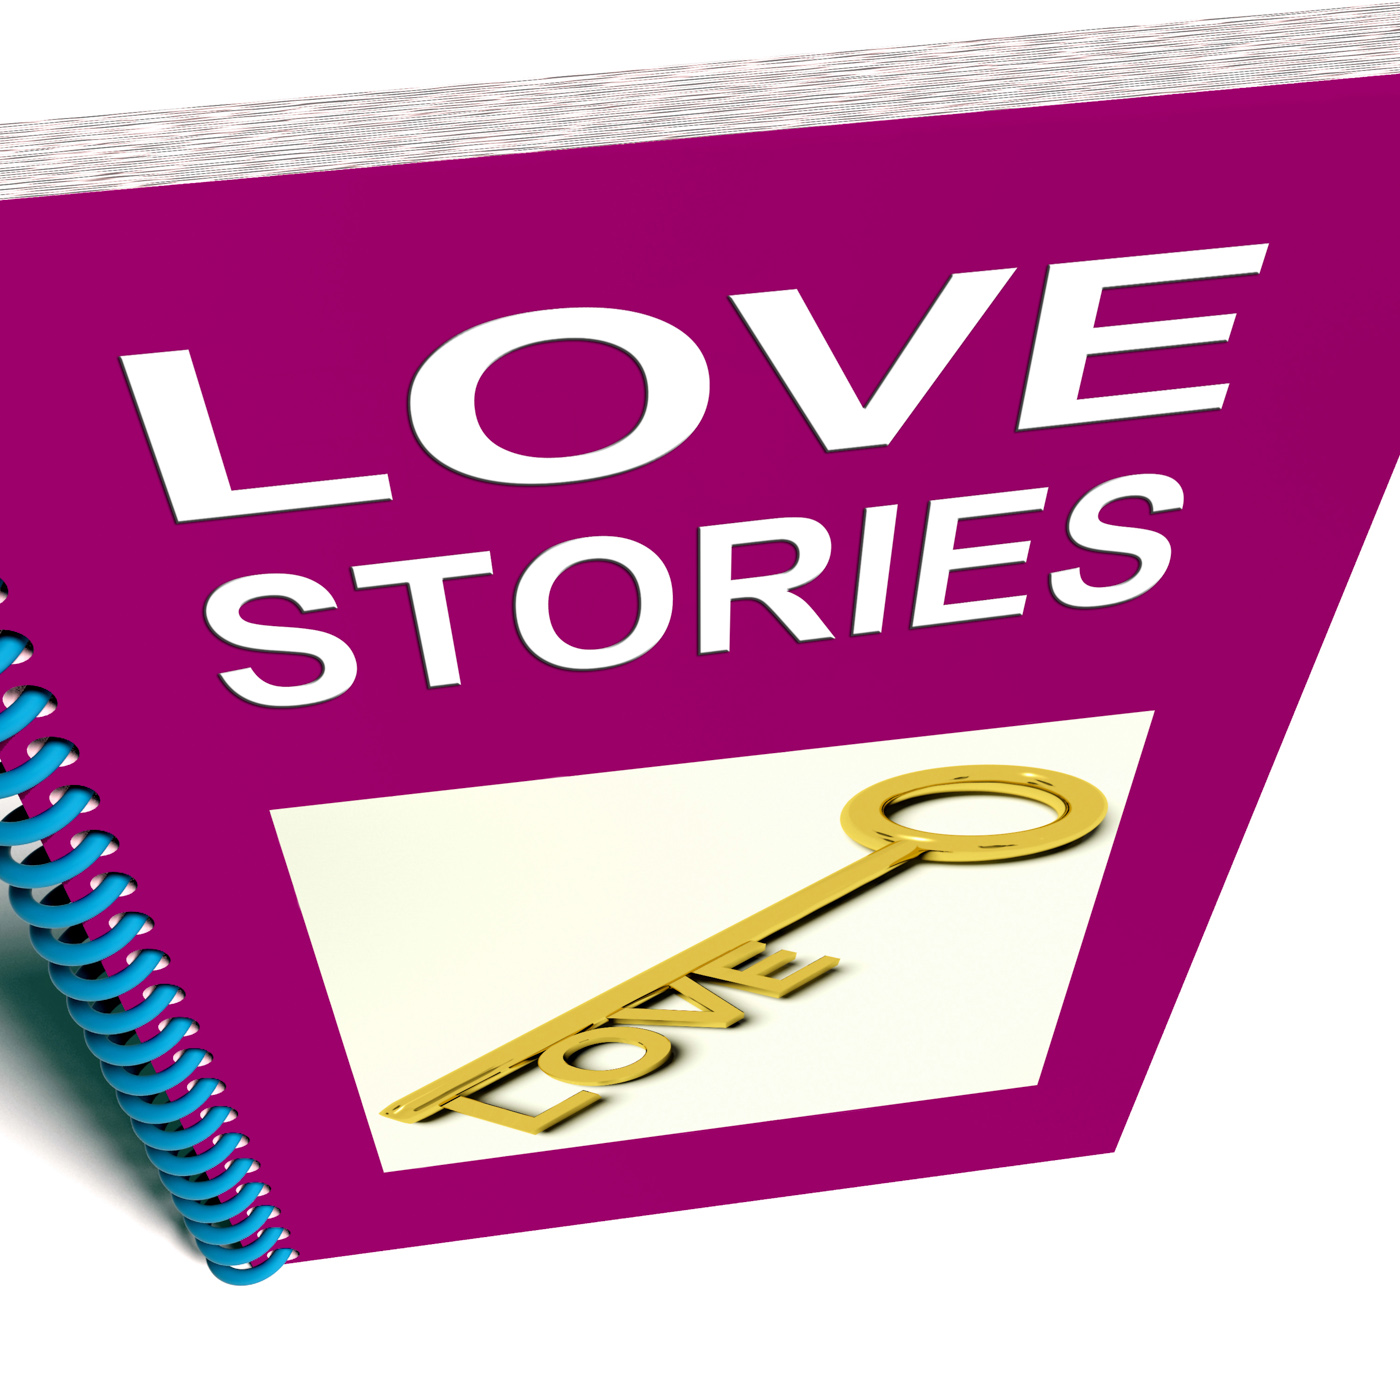 Love stories book gives tales of romantic and loving feelings photo